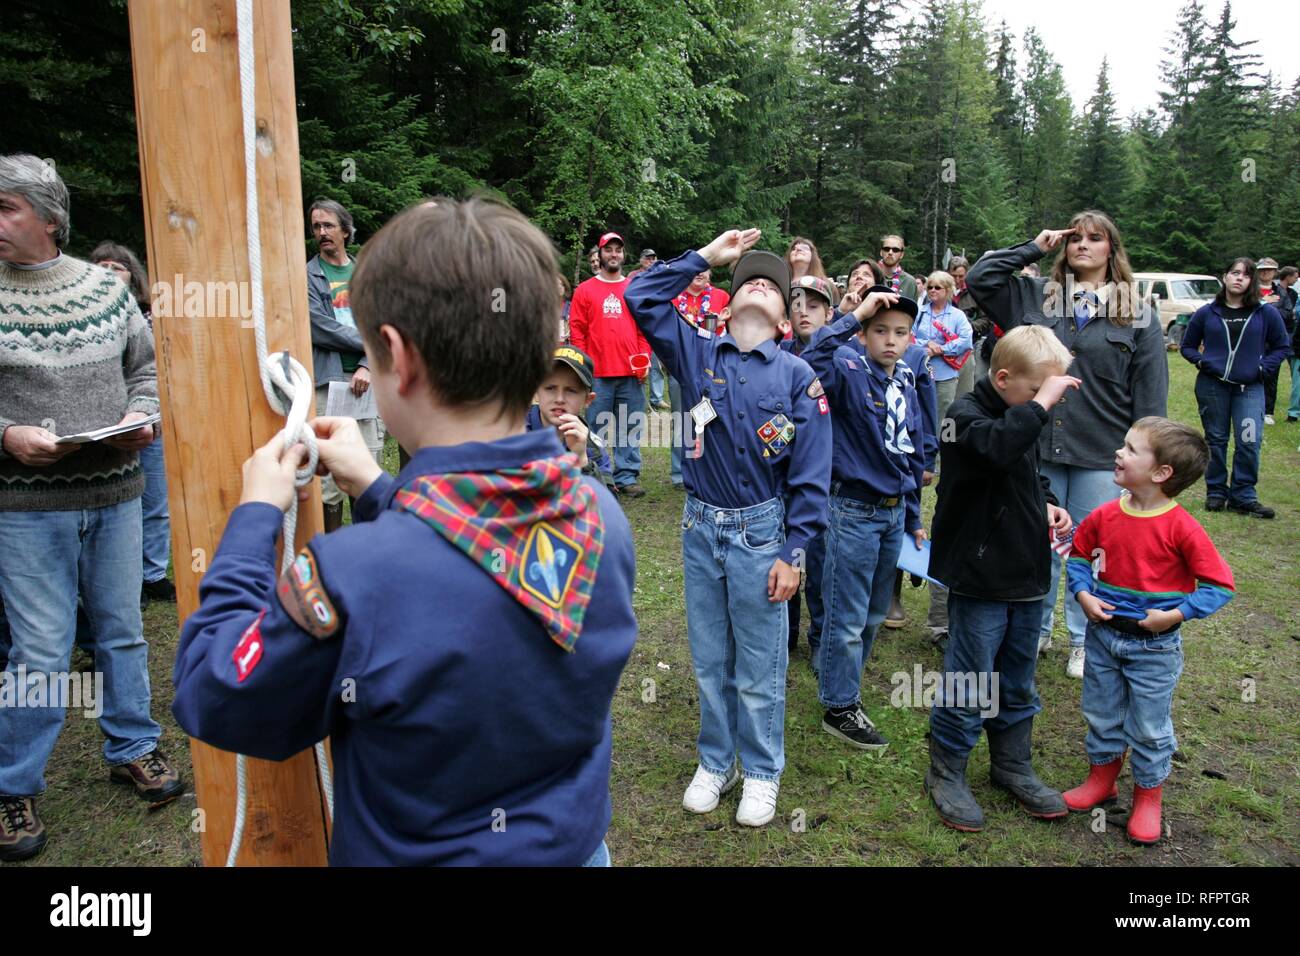 USA, United States of America, Alaska, Gustavus: 4th July, Independence day party in Gustavus, a village with 400 residents. Stock Photo